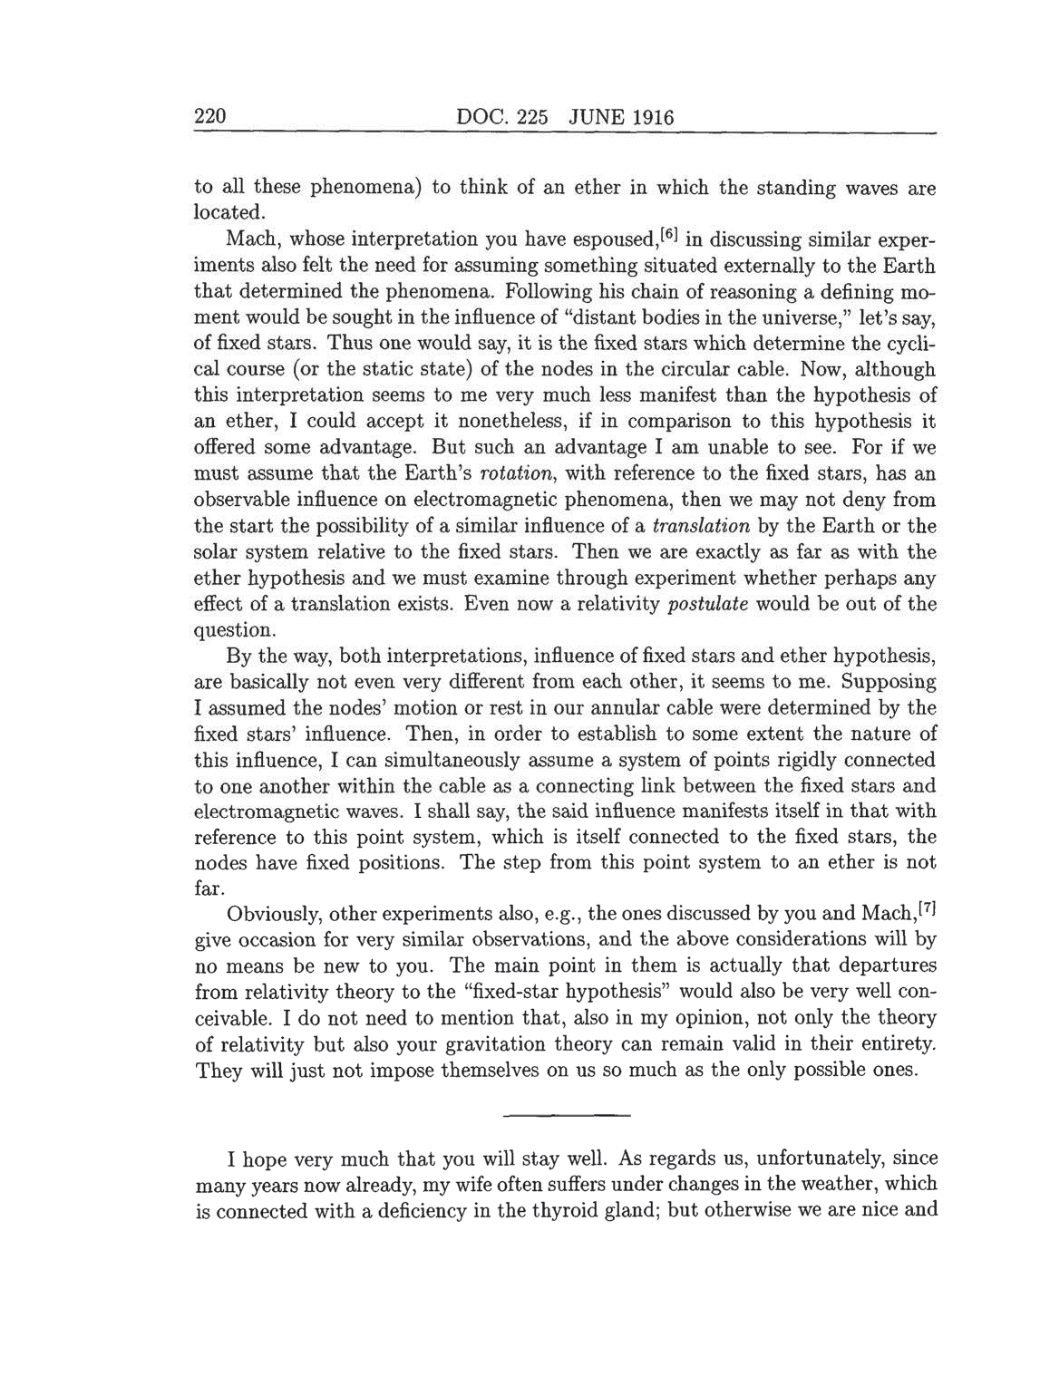 Volume 8: The Berlin Years: Correspondence, 1914-1918 (English translation supplement) page 220